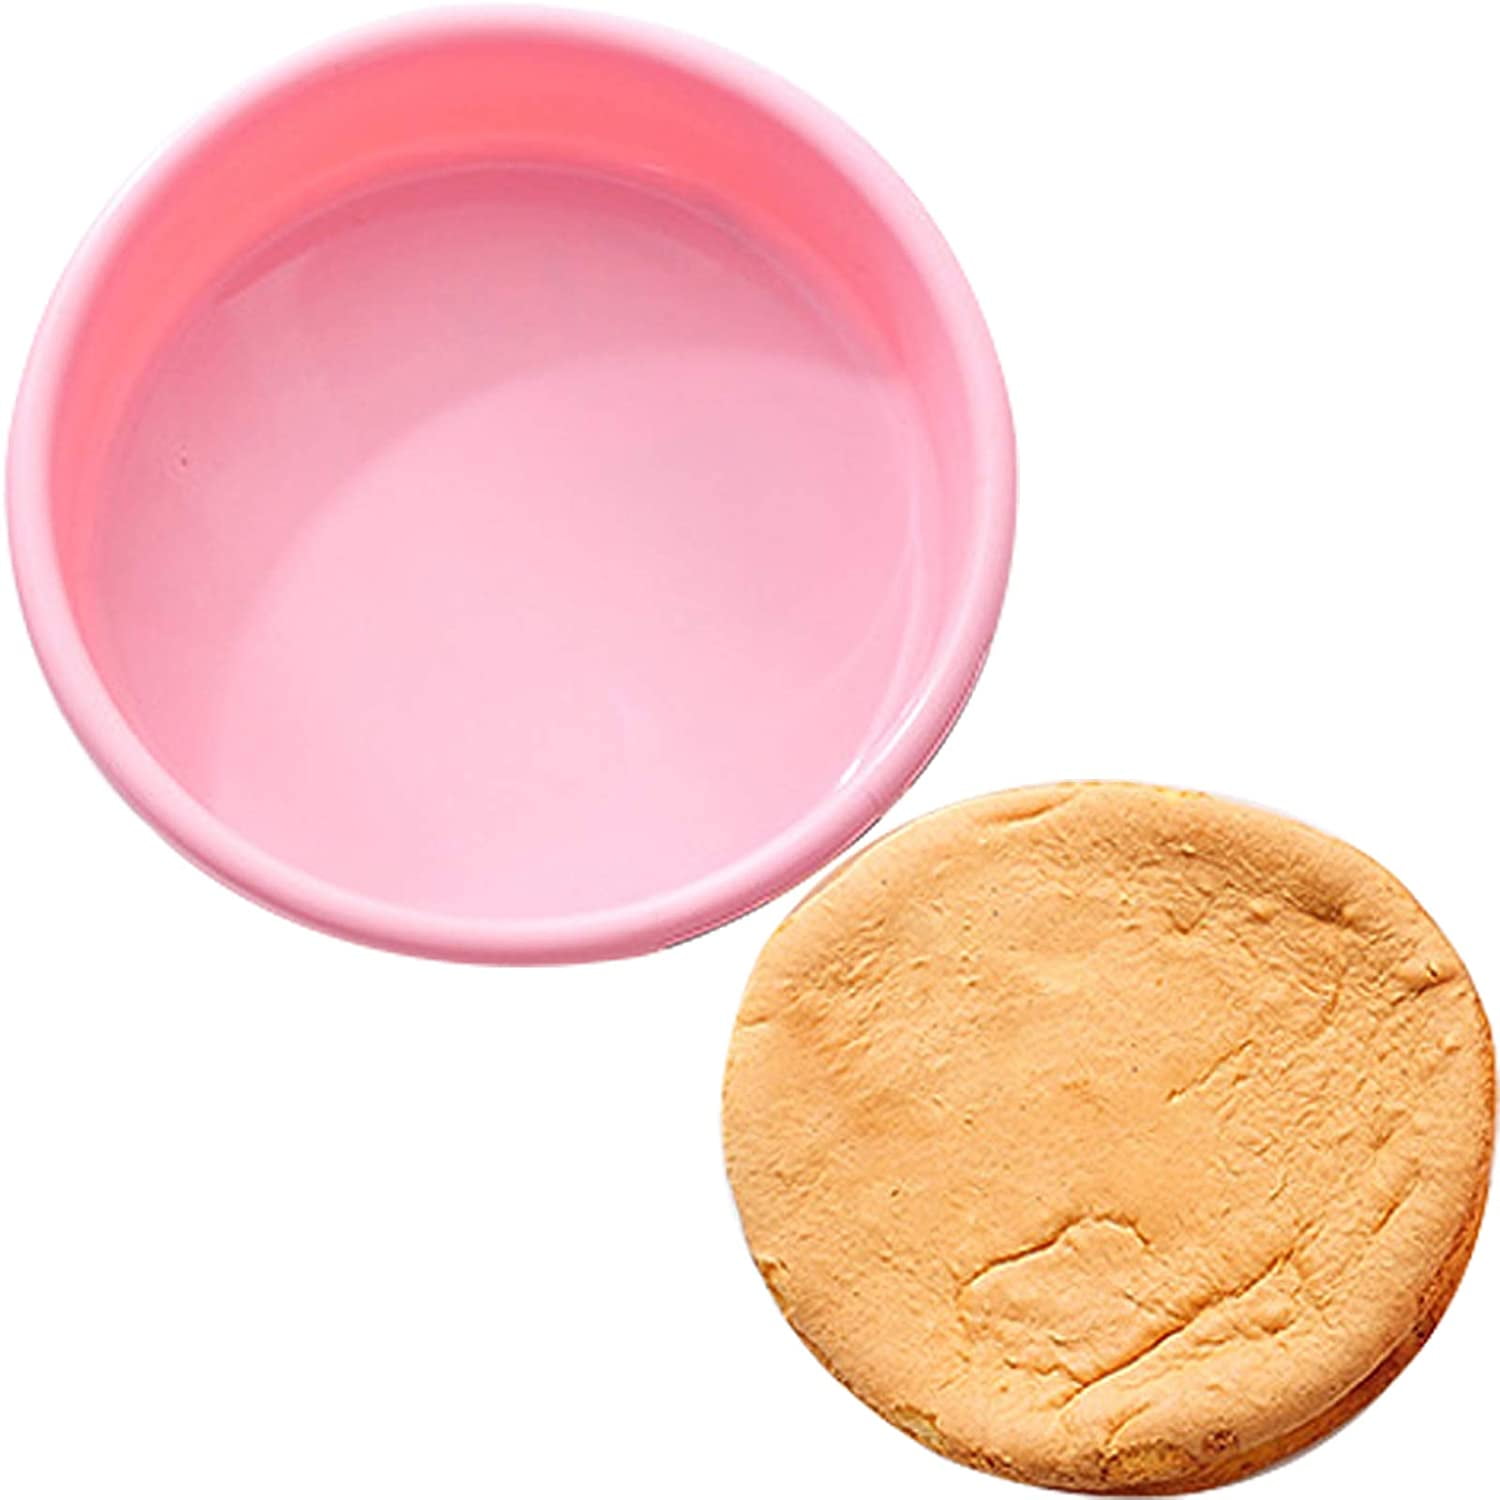 NEW ROUND SILICONE BAKING MOULD CAKES JELLY CAKE TIN RIDGED EDGE  19cm A1 PINK 